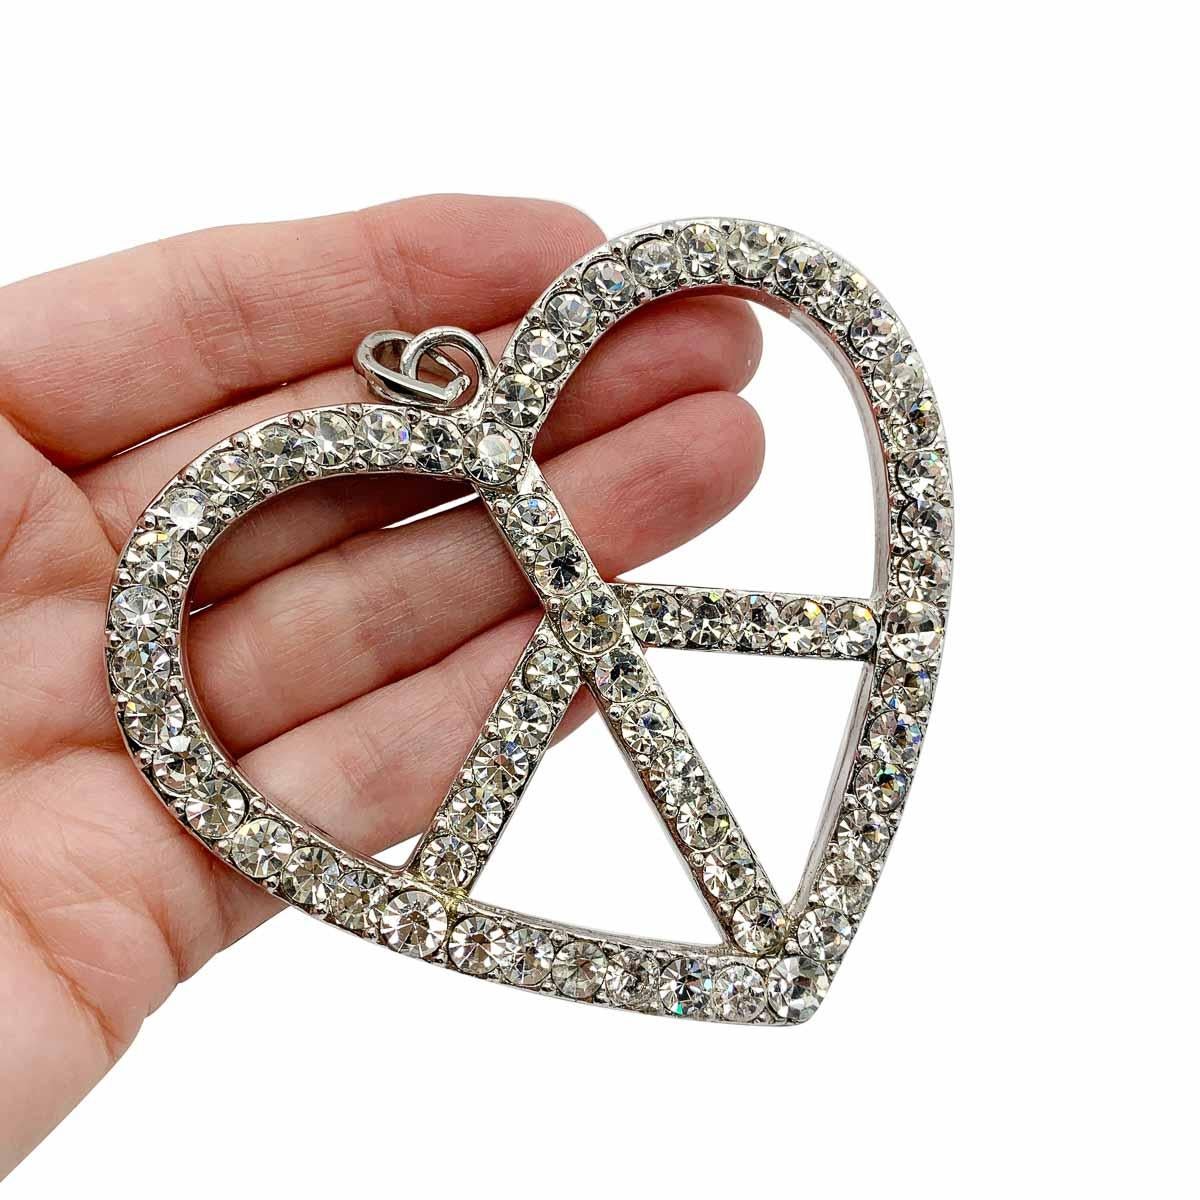 Harking back to the 80's with a serious Madonna vibe. A gigantic vintage Peace pendant. Featuring end to end crystals in a statement size heart inspired peace symbol.

Vintage Condition: Very good without damage or noteworthy wear.
Materials: Silver